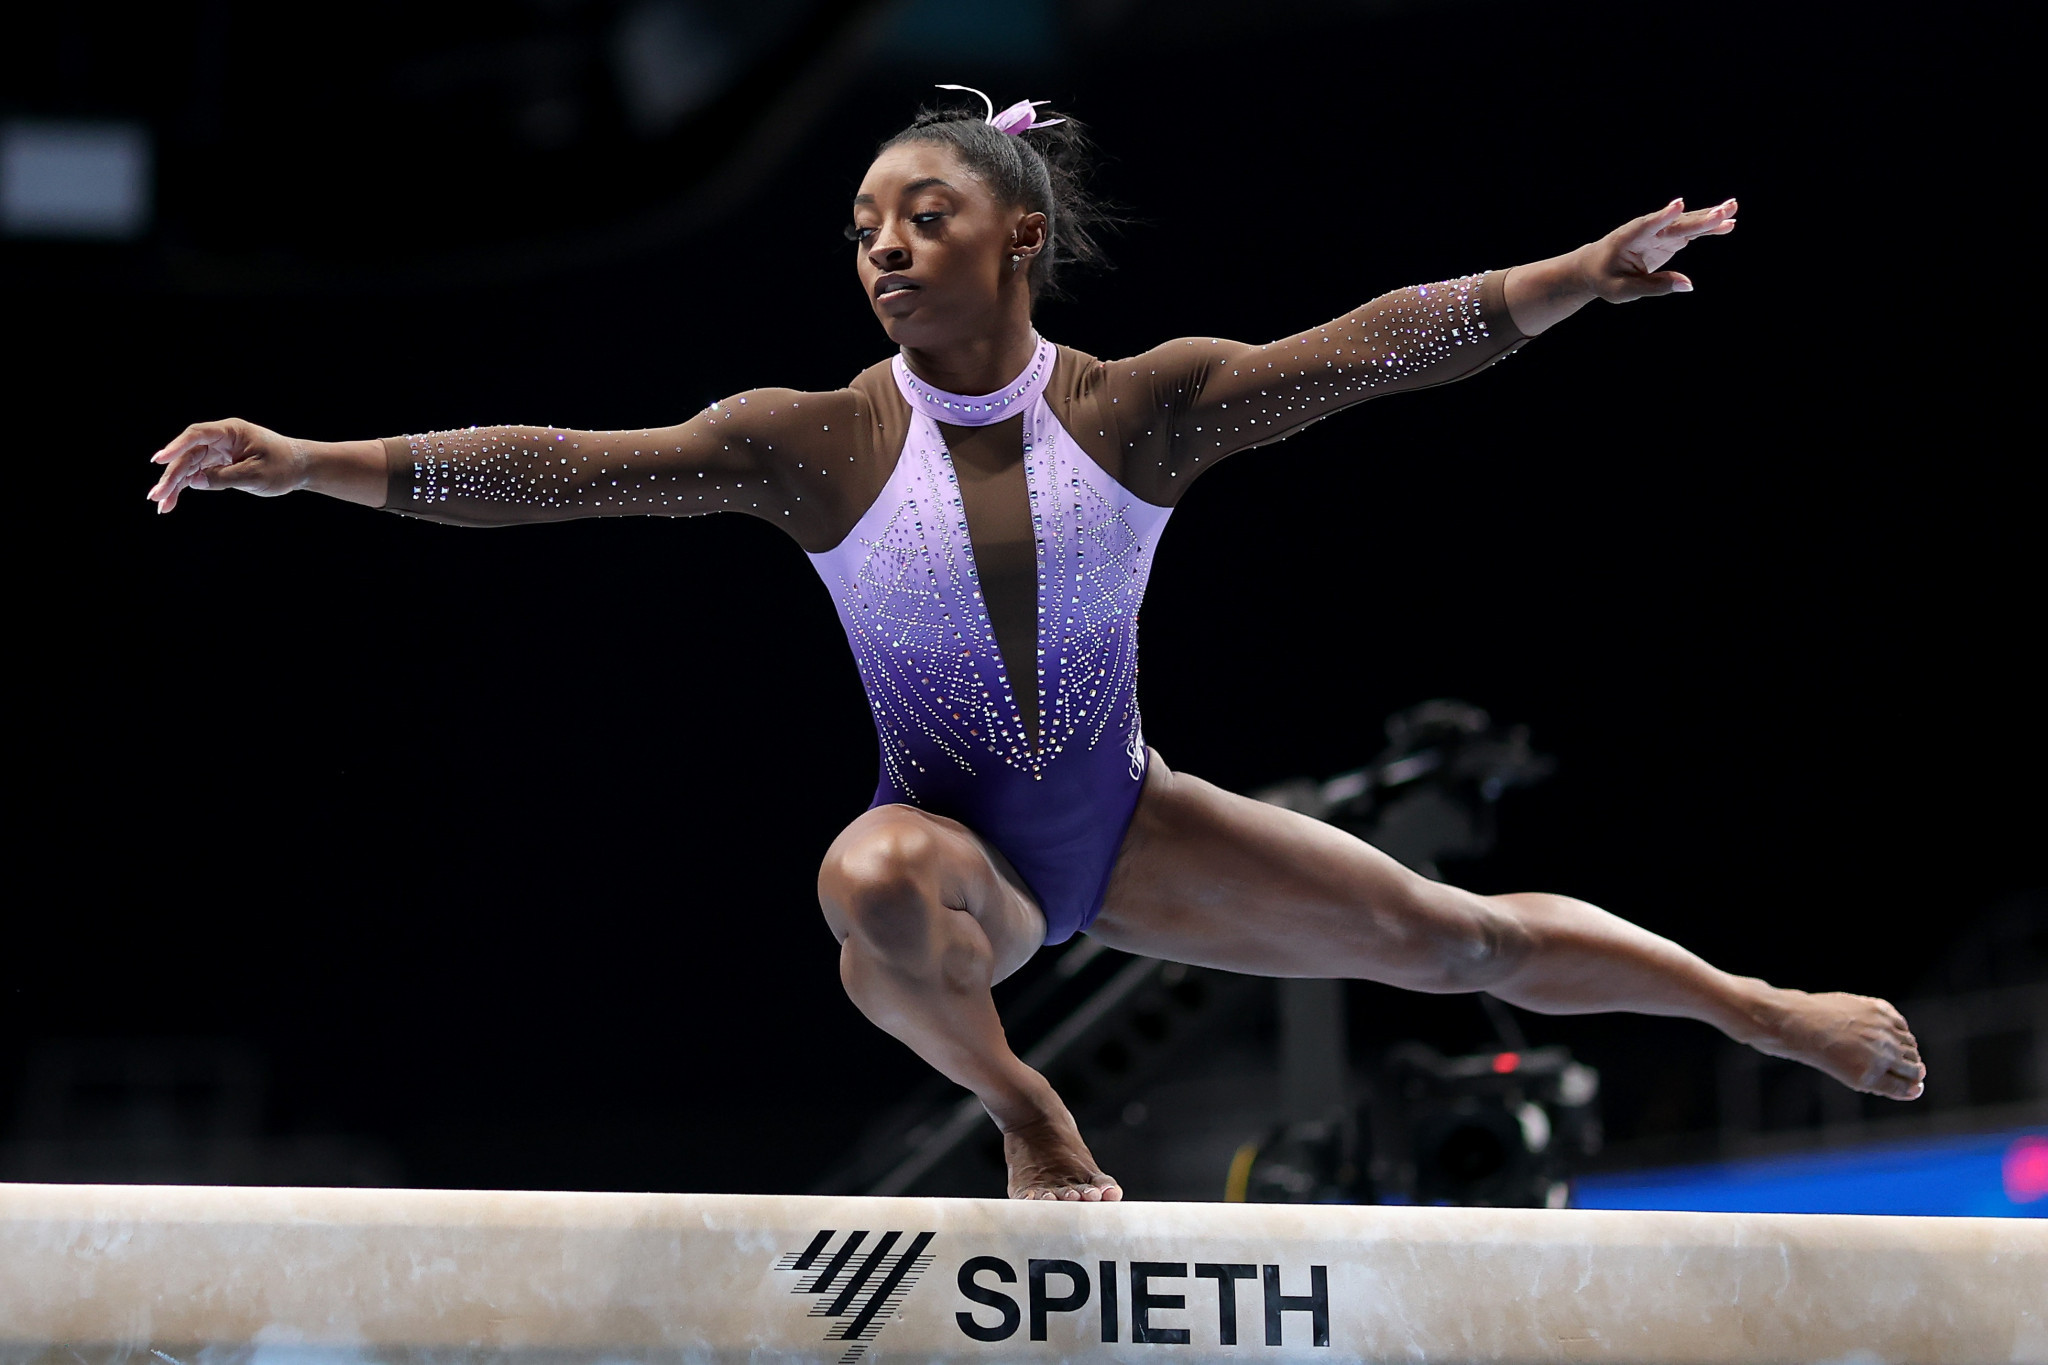 Simone Biles claimed the all-around title for a record eighth time ©Getty Images